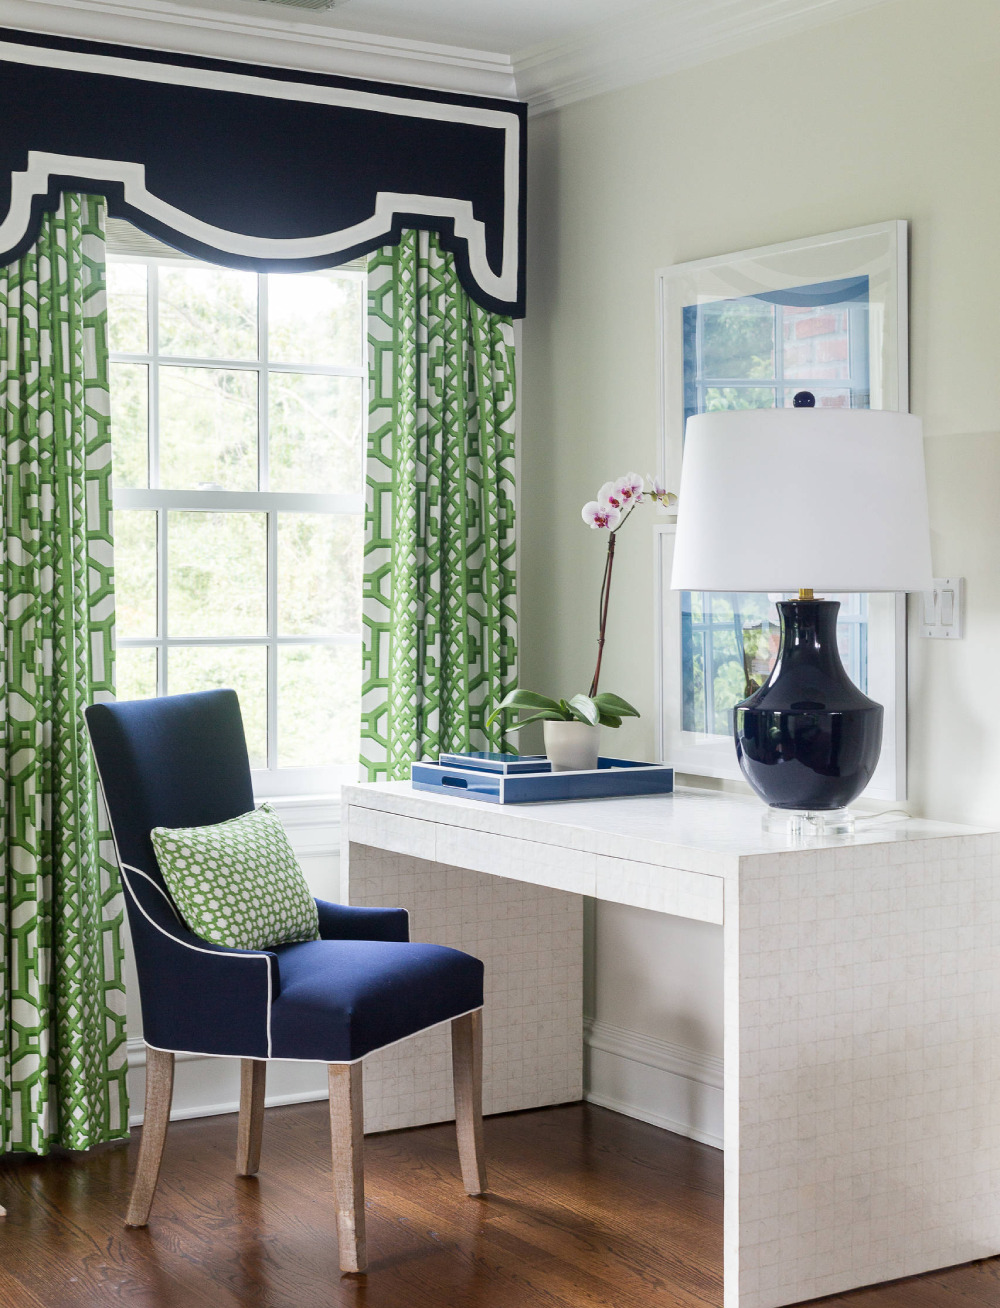 1-11-11 Colors That Go With Navy Blue in Interior Design